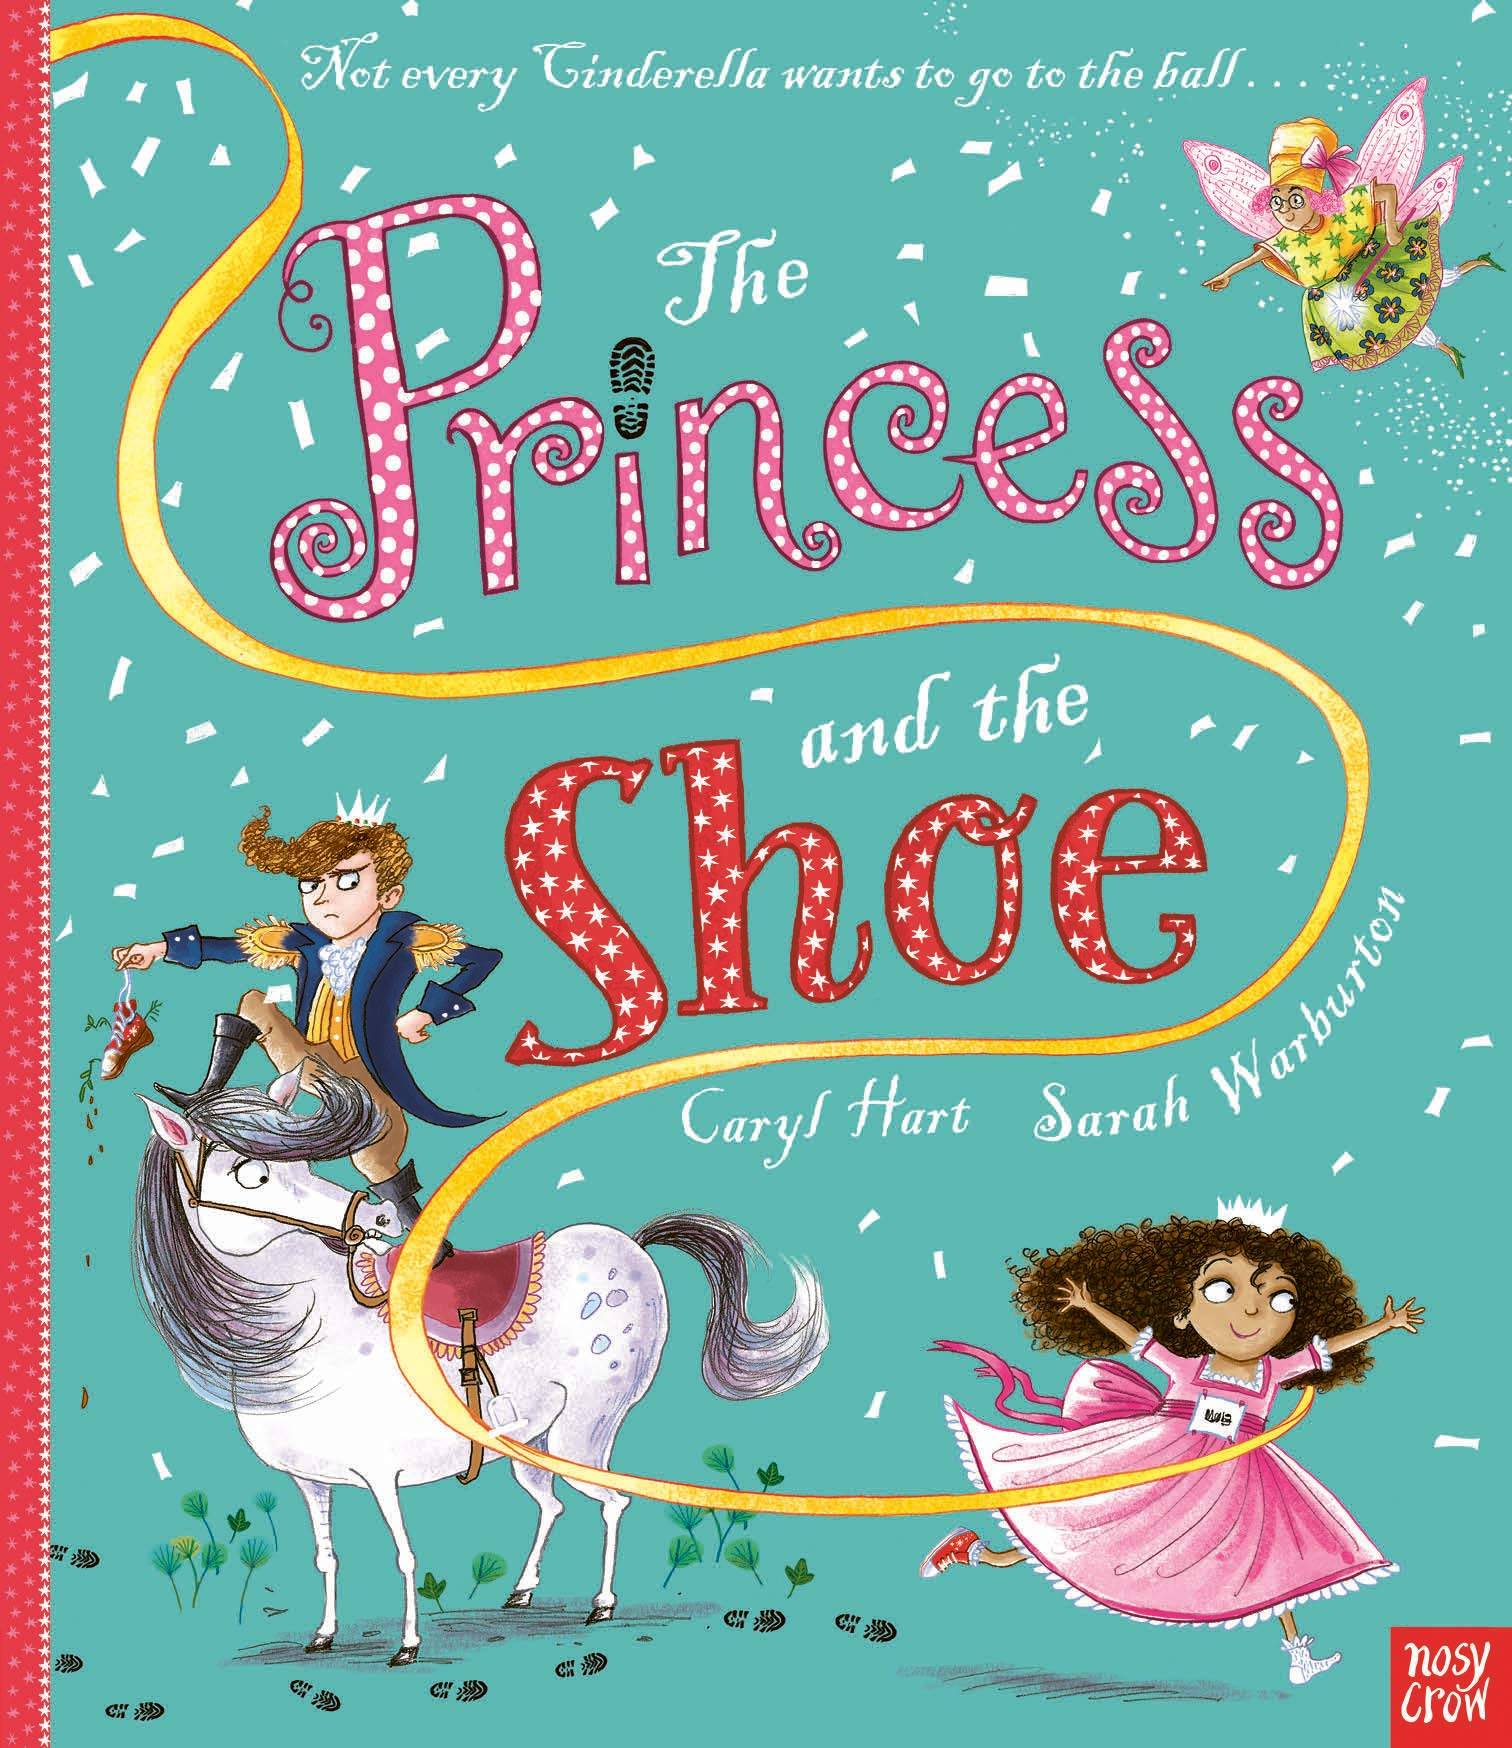 IMG : The Princess and the Shoe